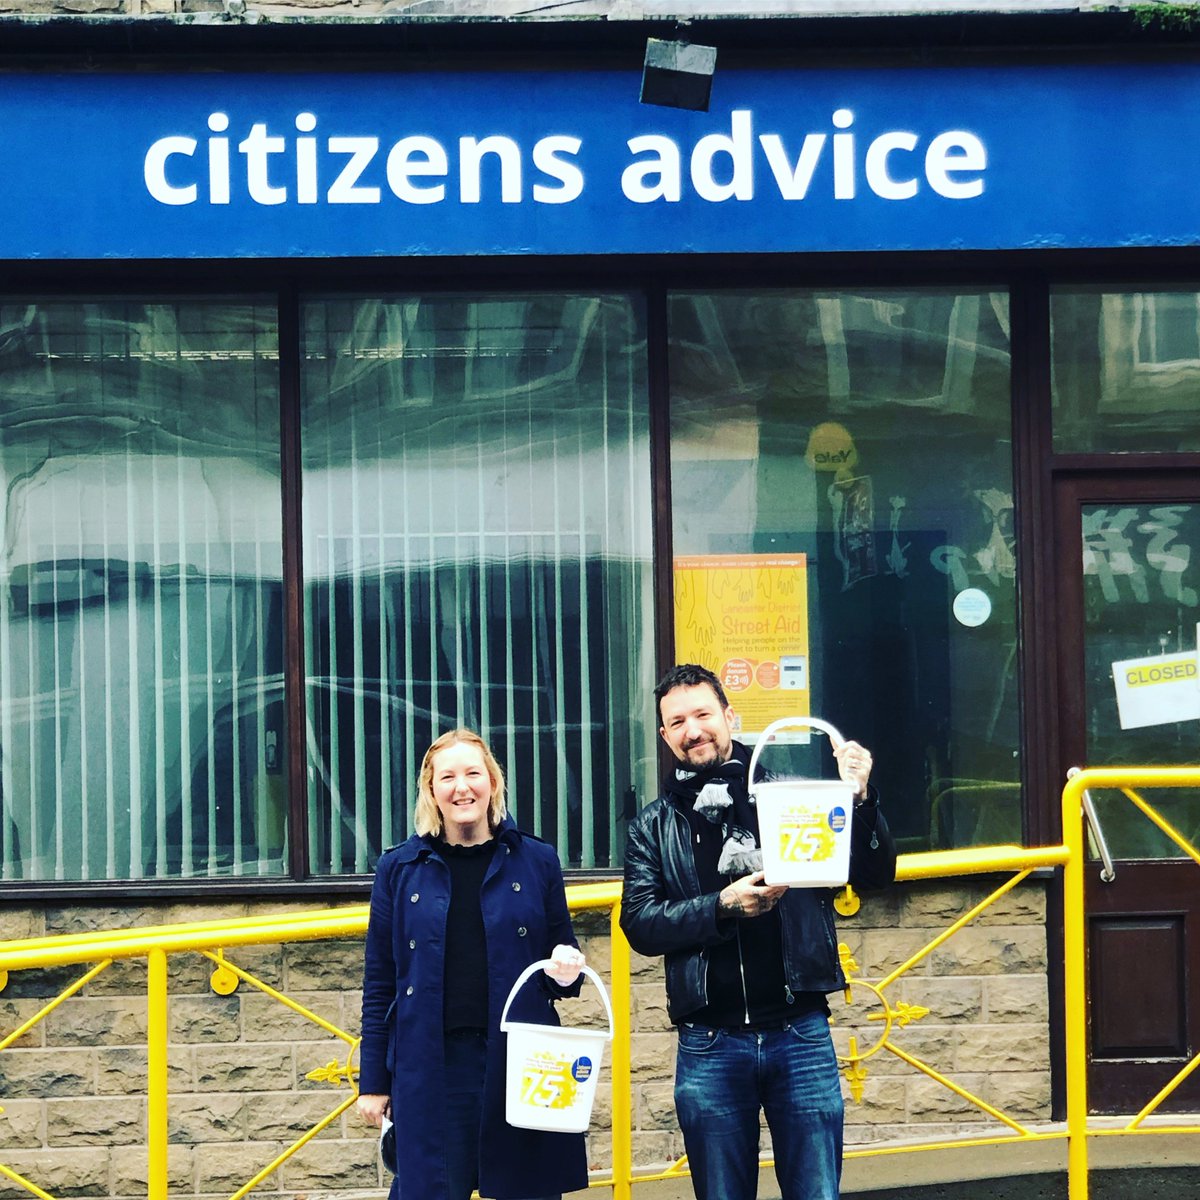 Hello Lancaster! My big sis works at @CitizensAdvice and at tonight’s show (at Kanteena, SOLD OUT!) we’ll be doing a collection for them at merch. Doors 7, music 7.15, @wilswoodbuoys @LotteryWinners support, see you there! (You can also donate here - justgiving.com/citizensadvice… )